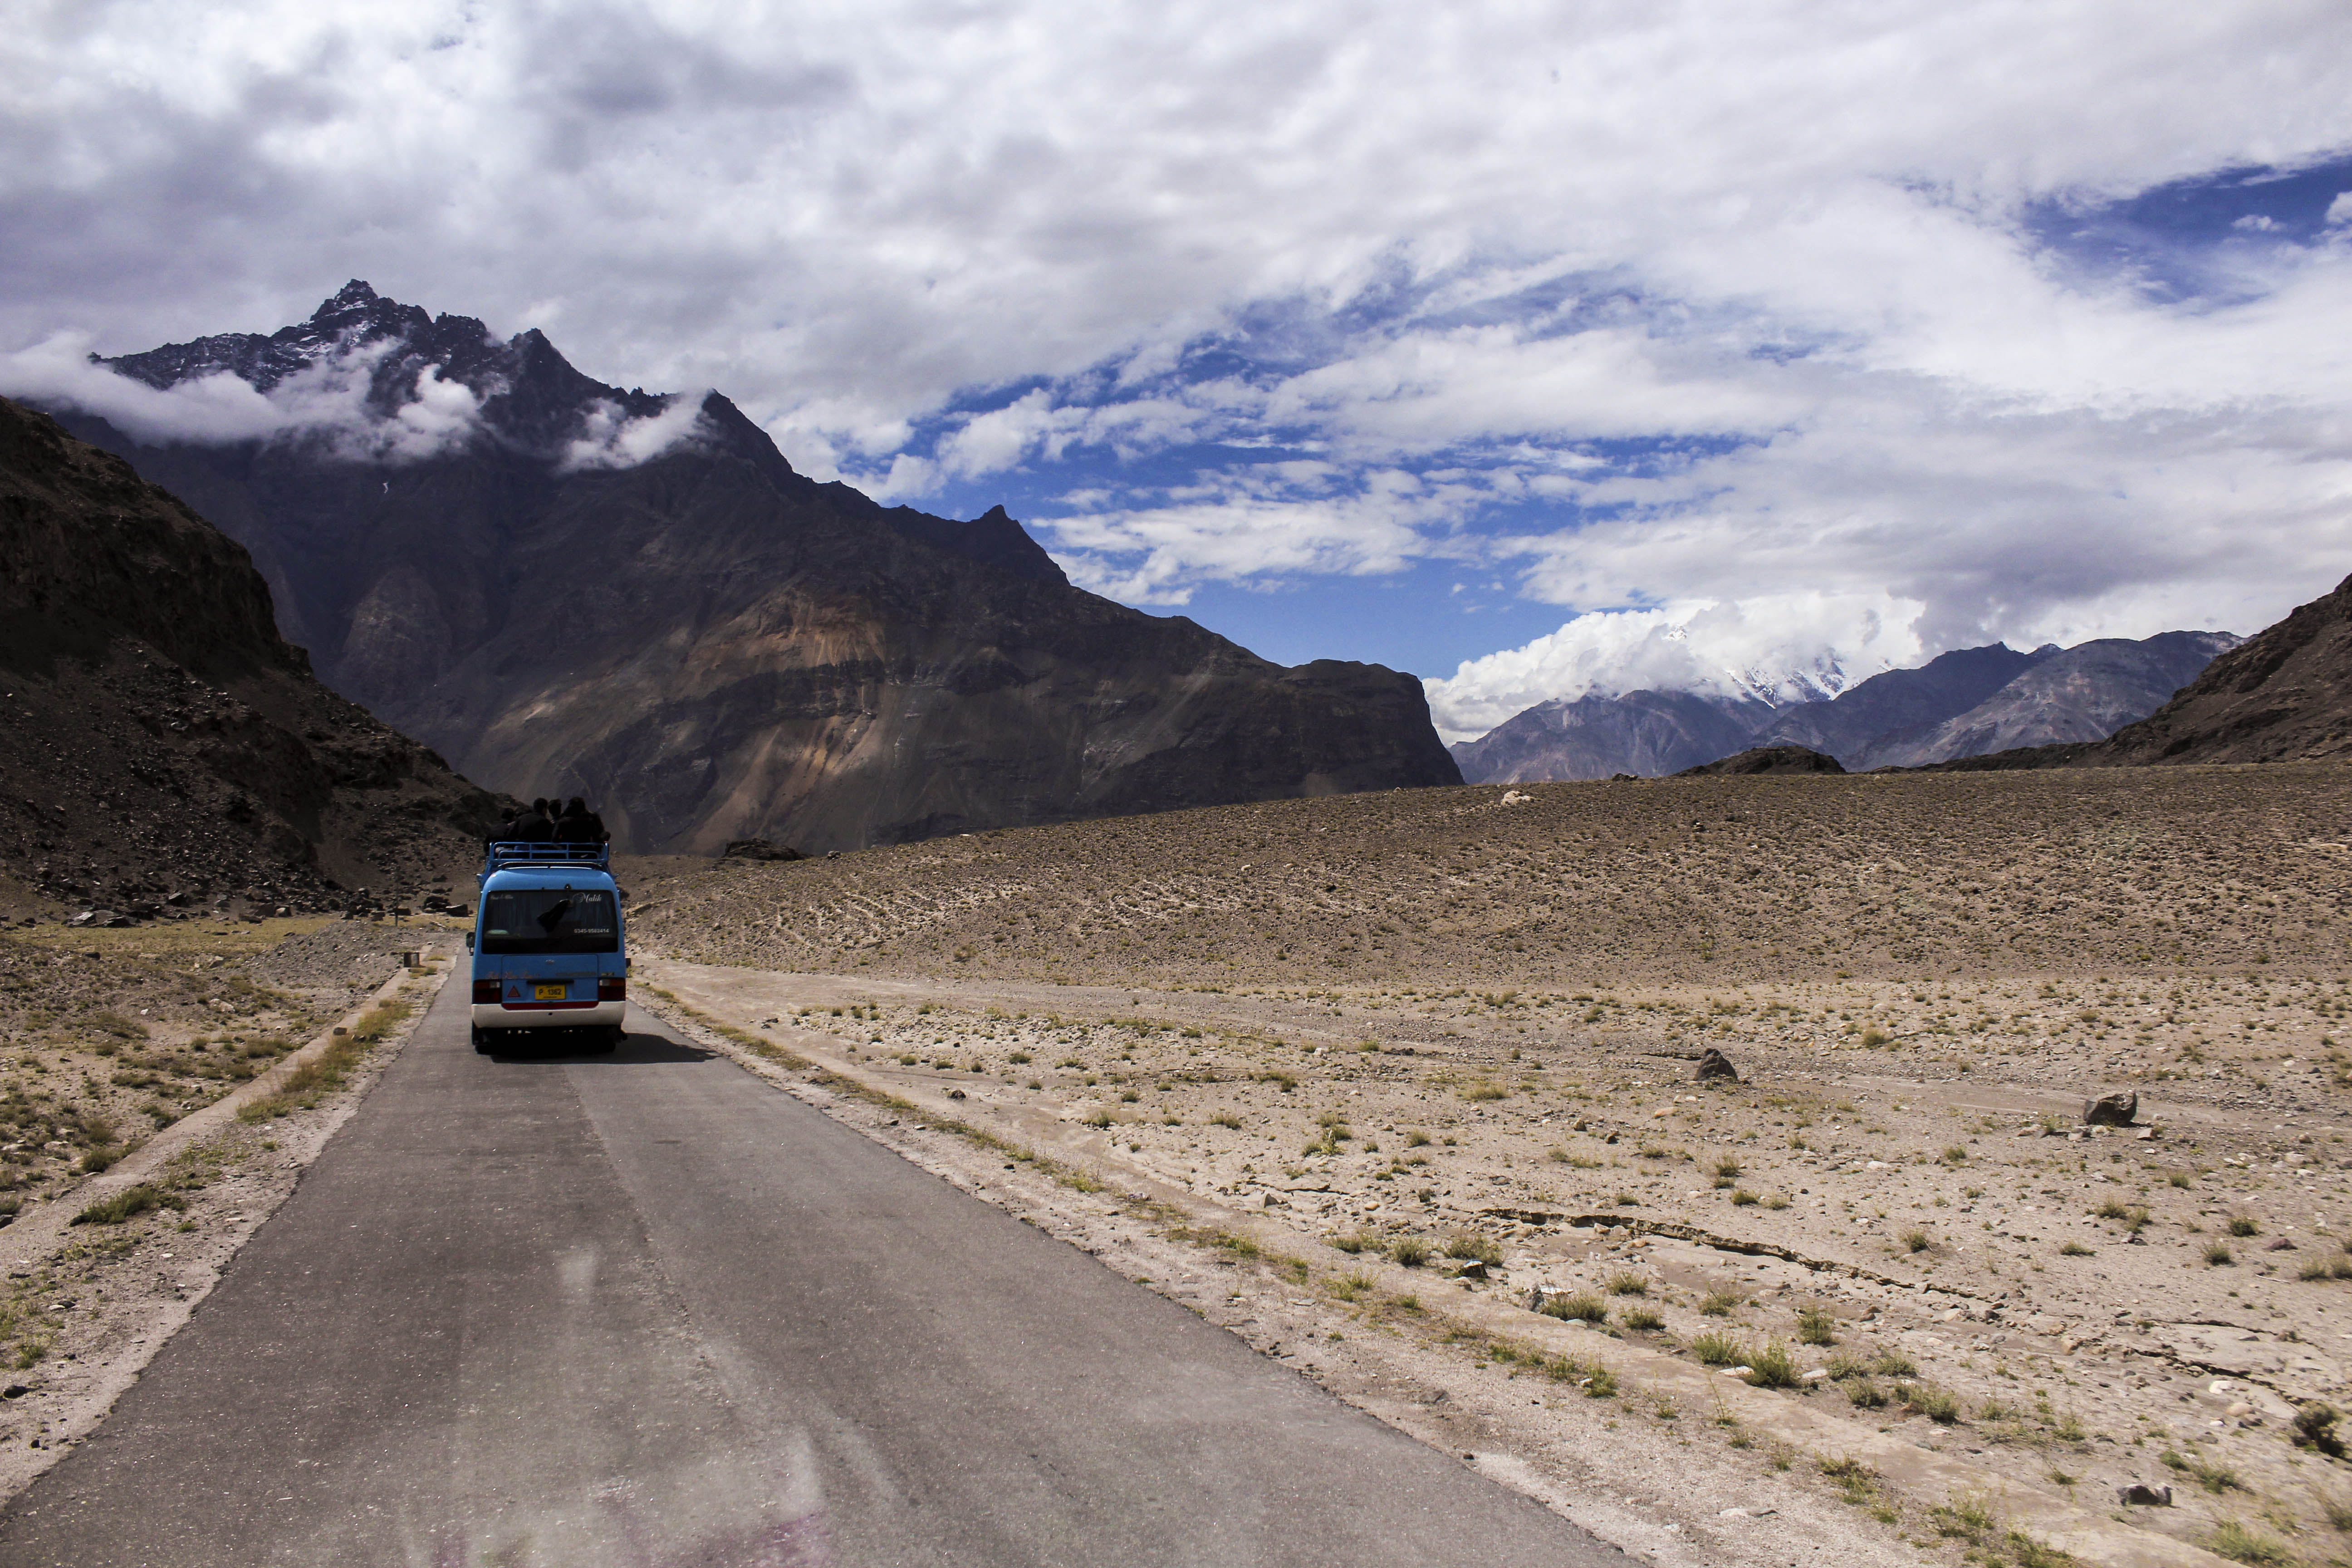 File:Road to Shigar Valley on Skardu Road.jpg - Wikimedia Commons